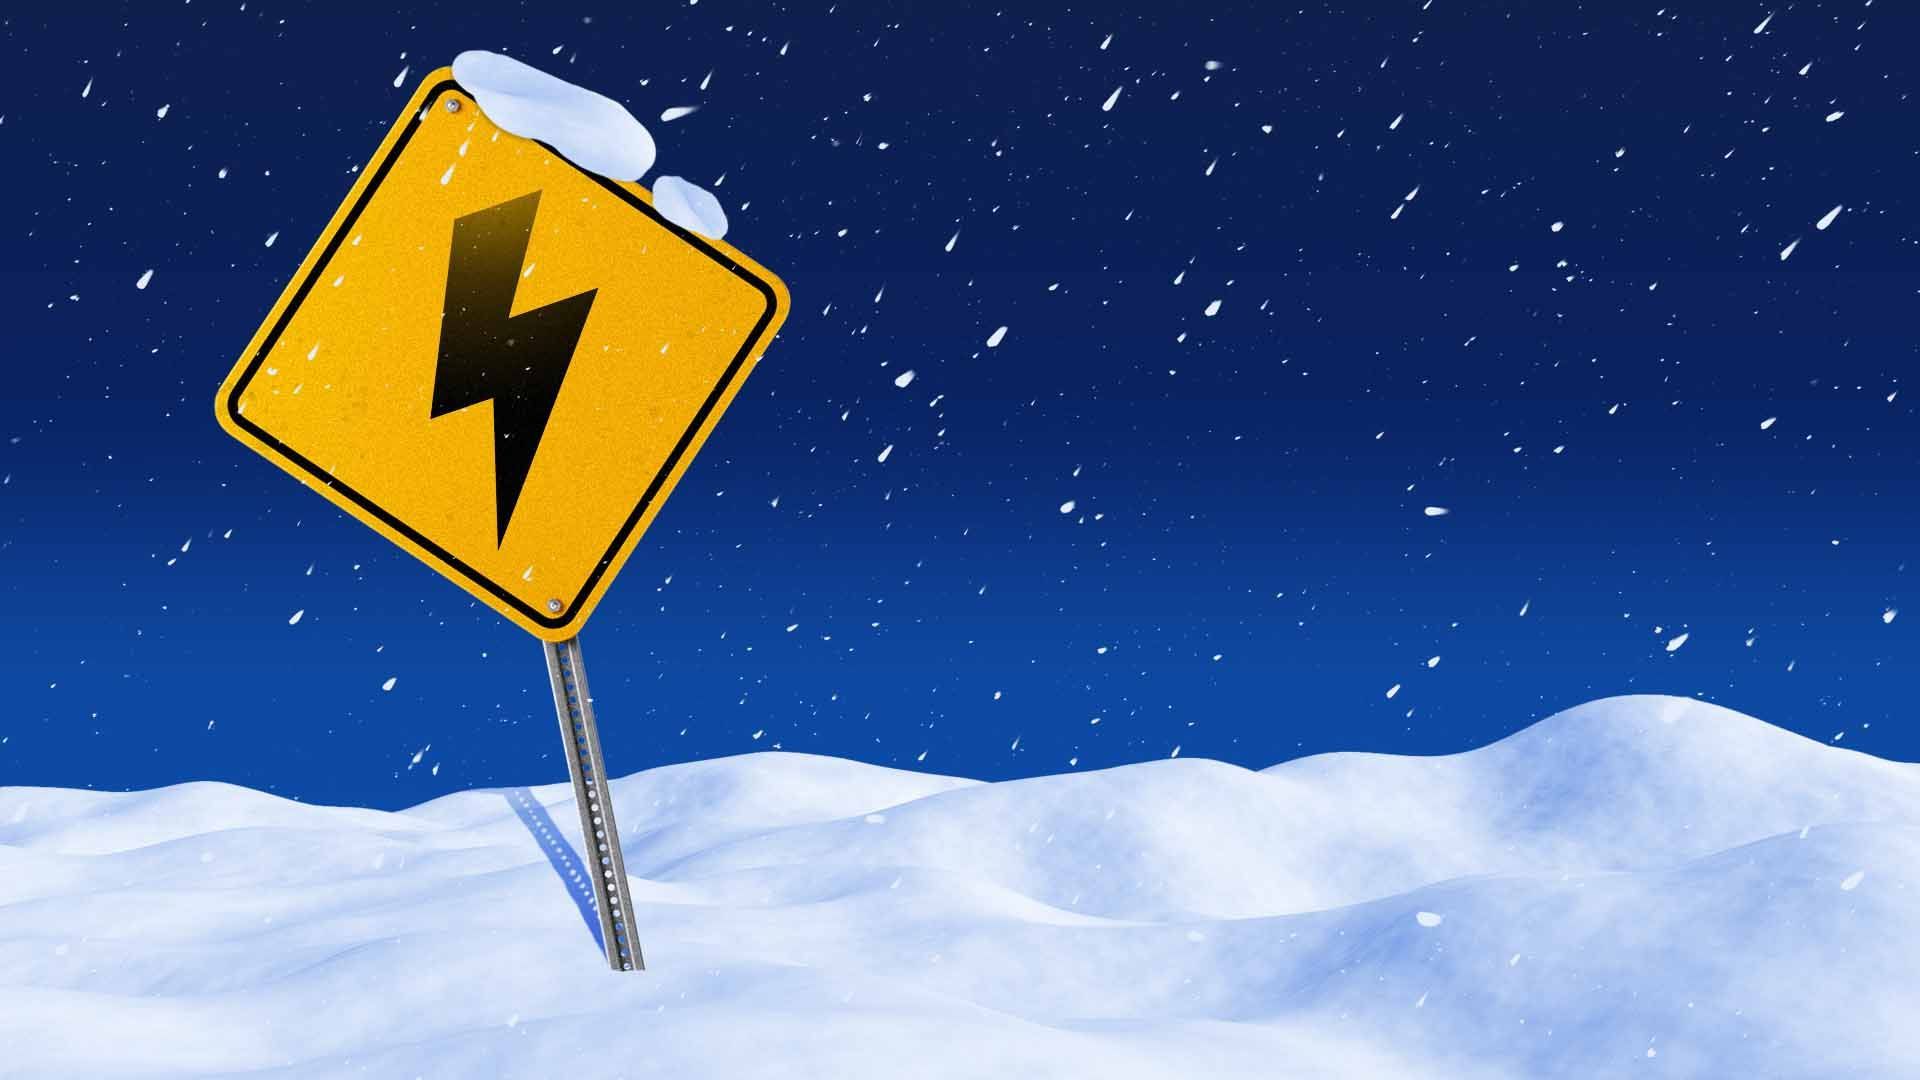 Illustration of a road sign with a lightning bolt in the middle in a snowstorm